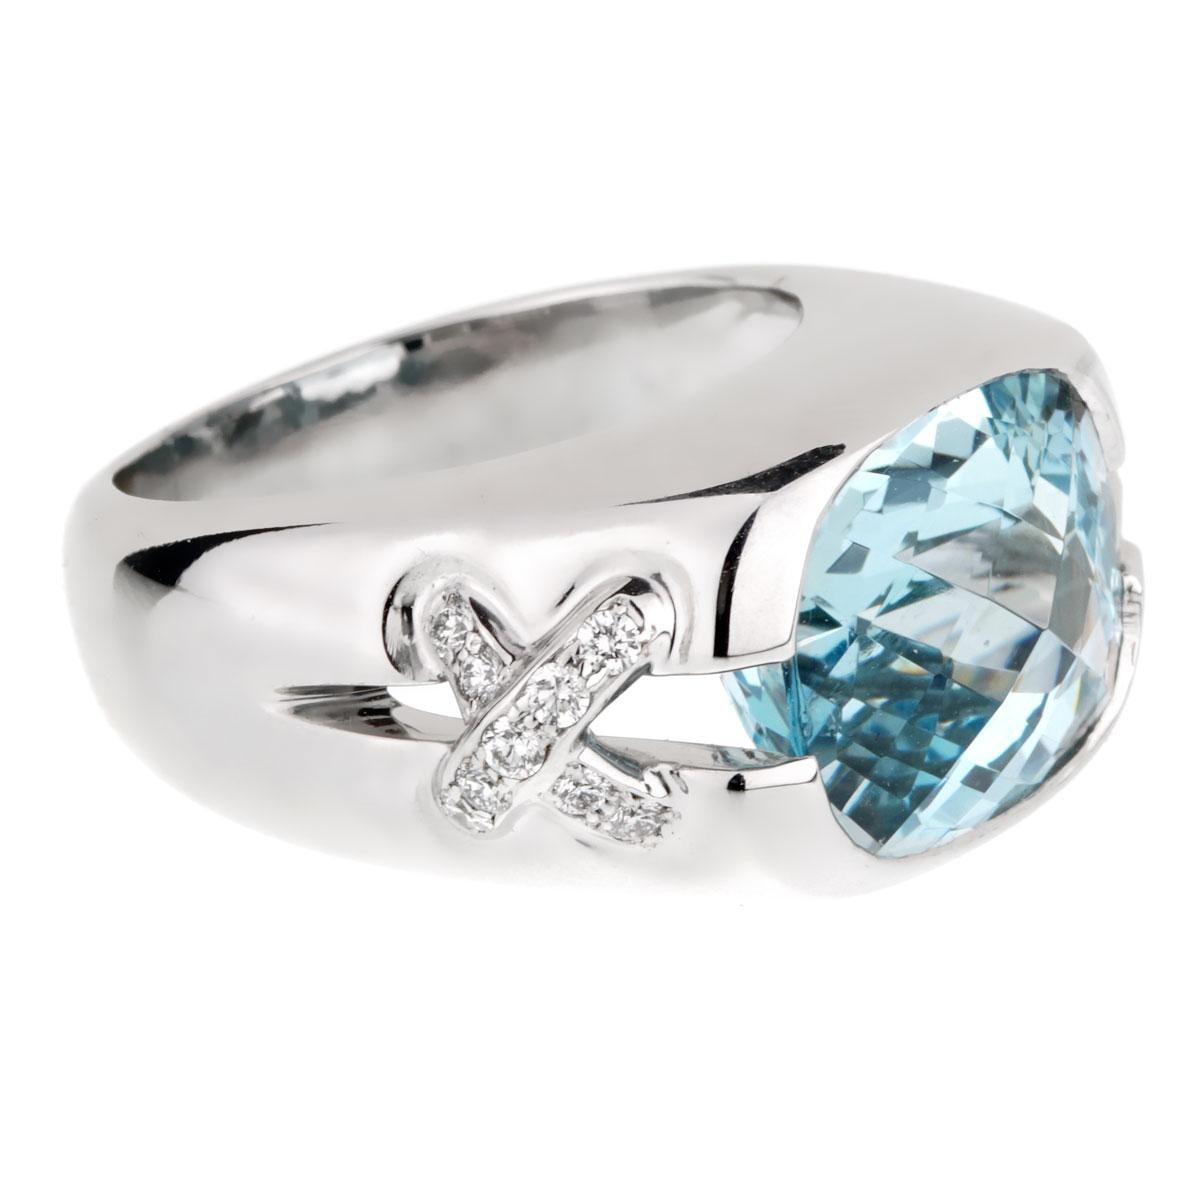 A fabulous Tiffany & Co ring featuring a 5ct appx Aquamarine stone flanked by 2 X motifs set with round brilliant cut diamonds in 18k white gold.

Size 5 (Resizeable)